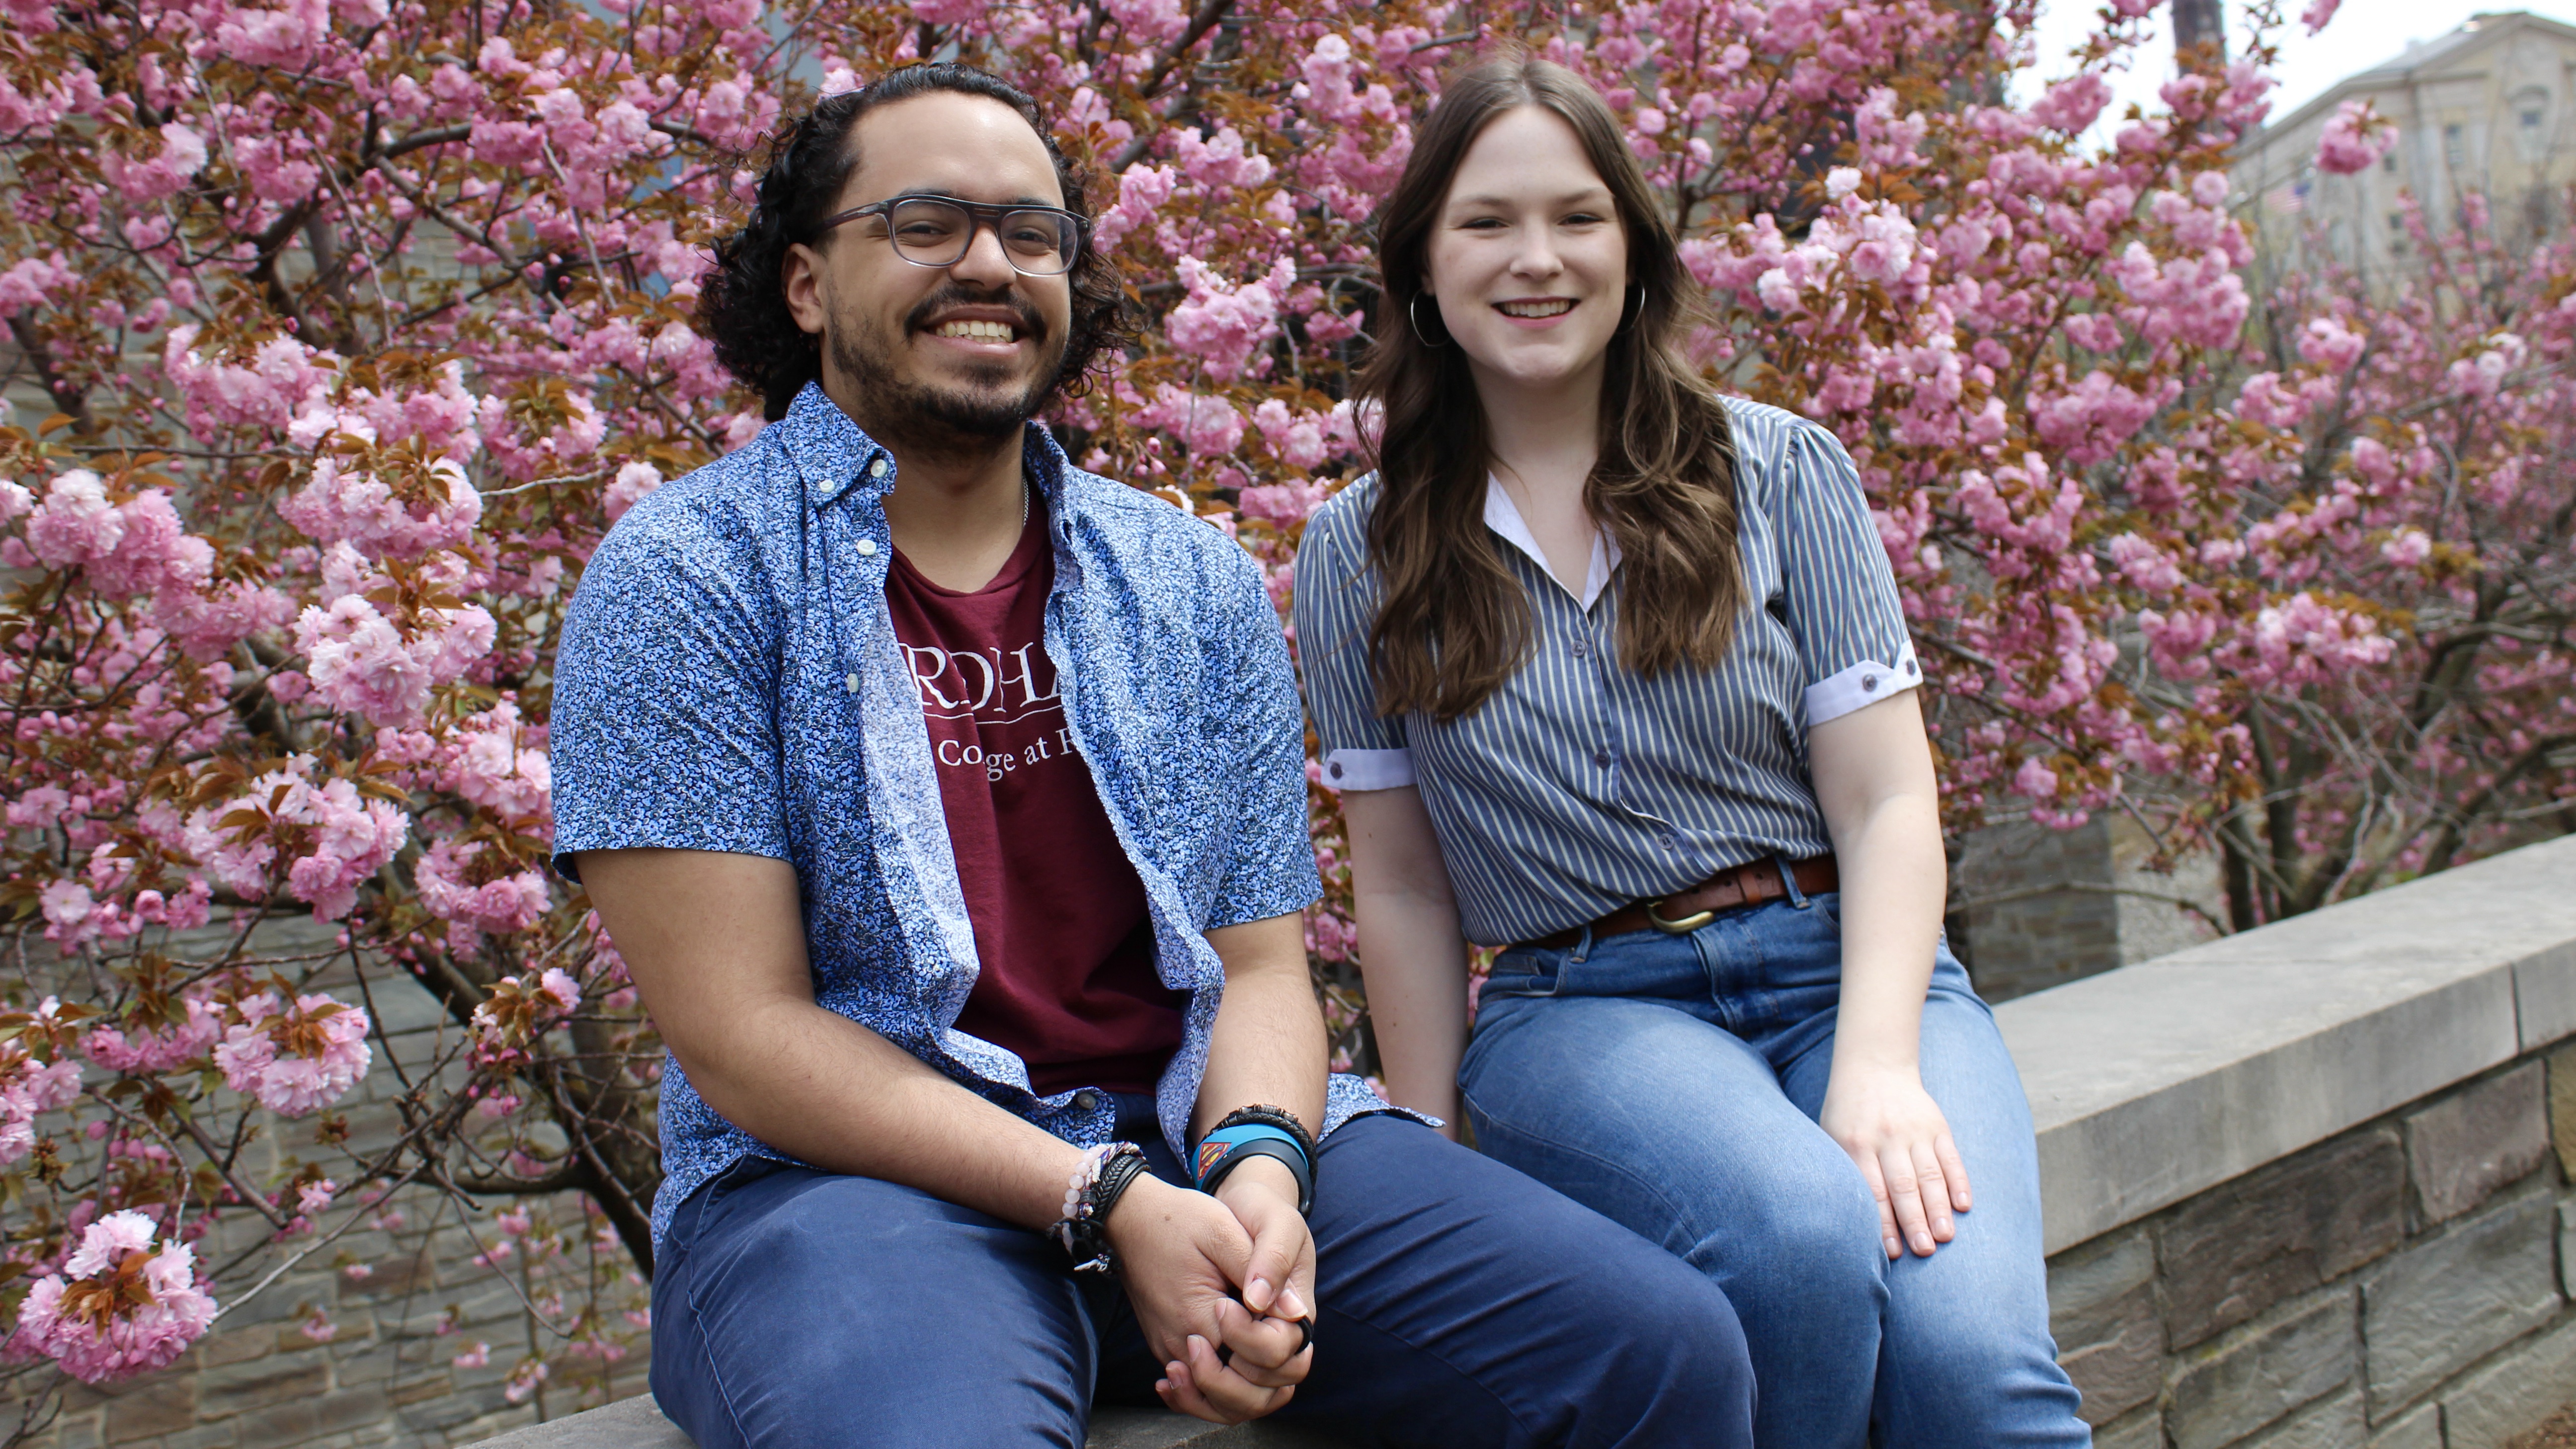 A man and woman smile in front of pink cherry blossom trees.